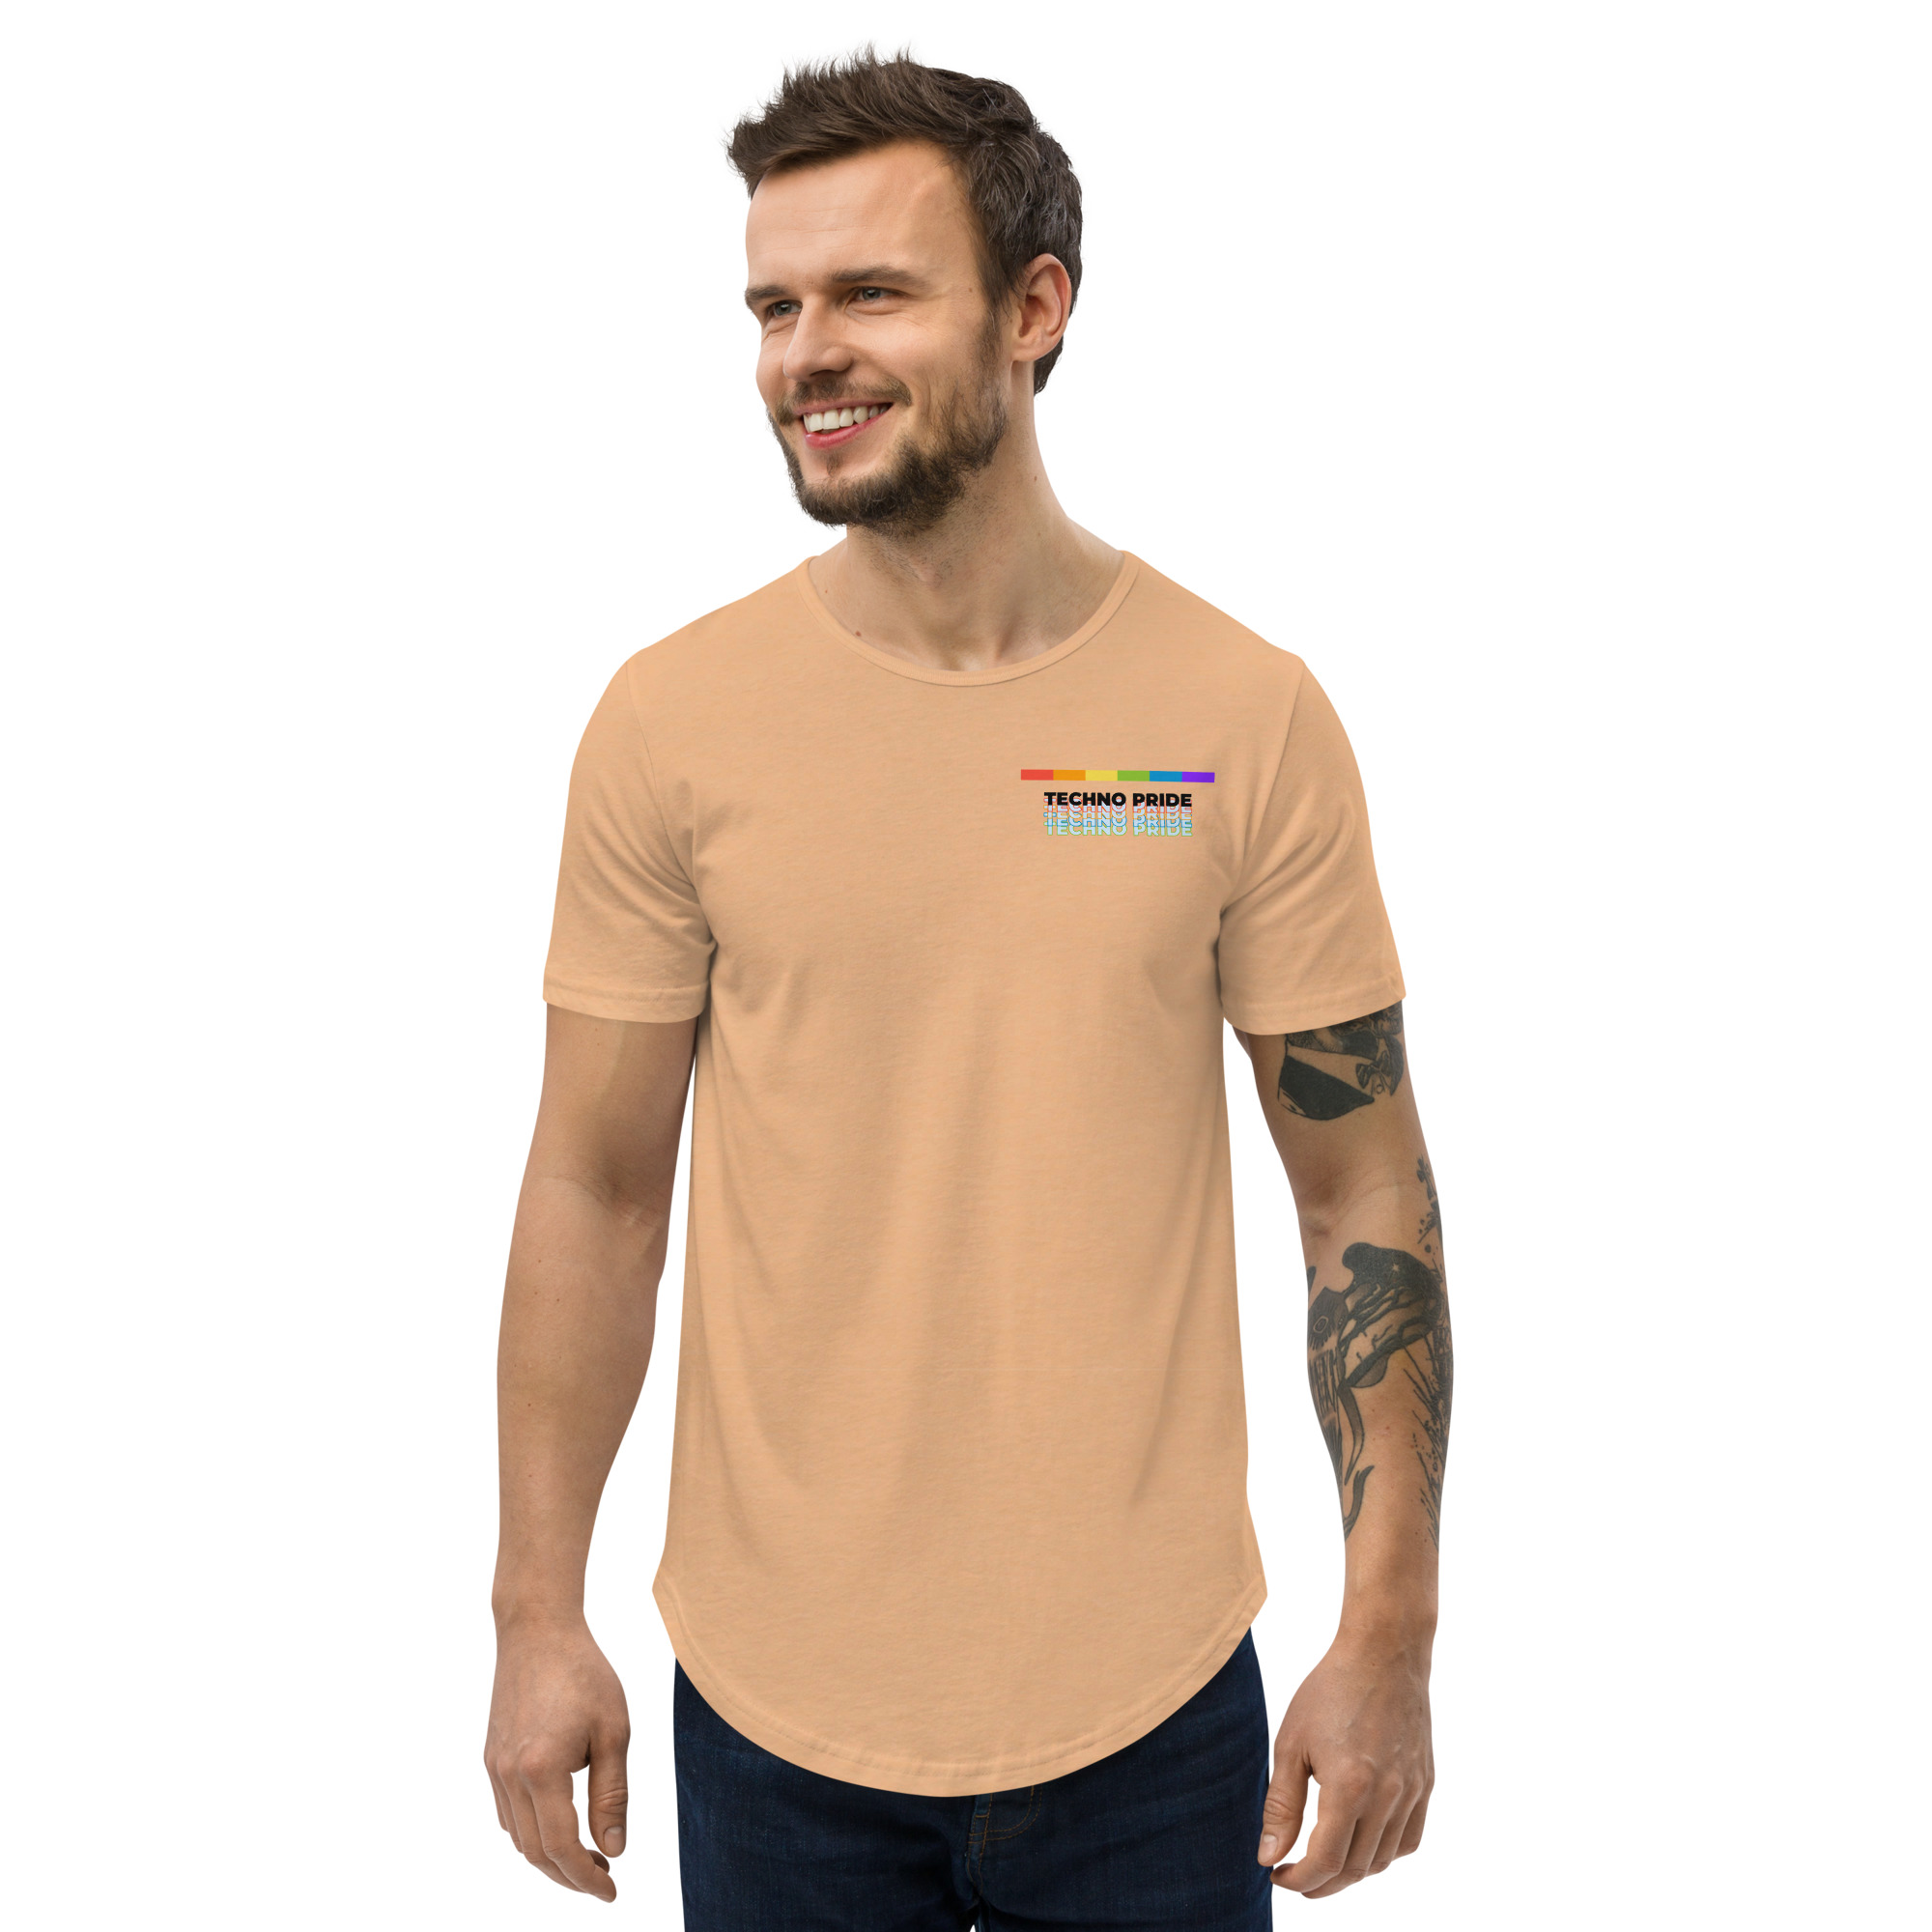 Men's Super Soft Curved Hem Tee in White, Combed Cotton